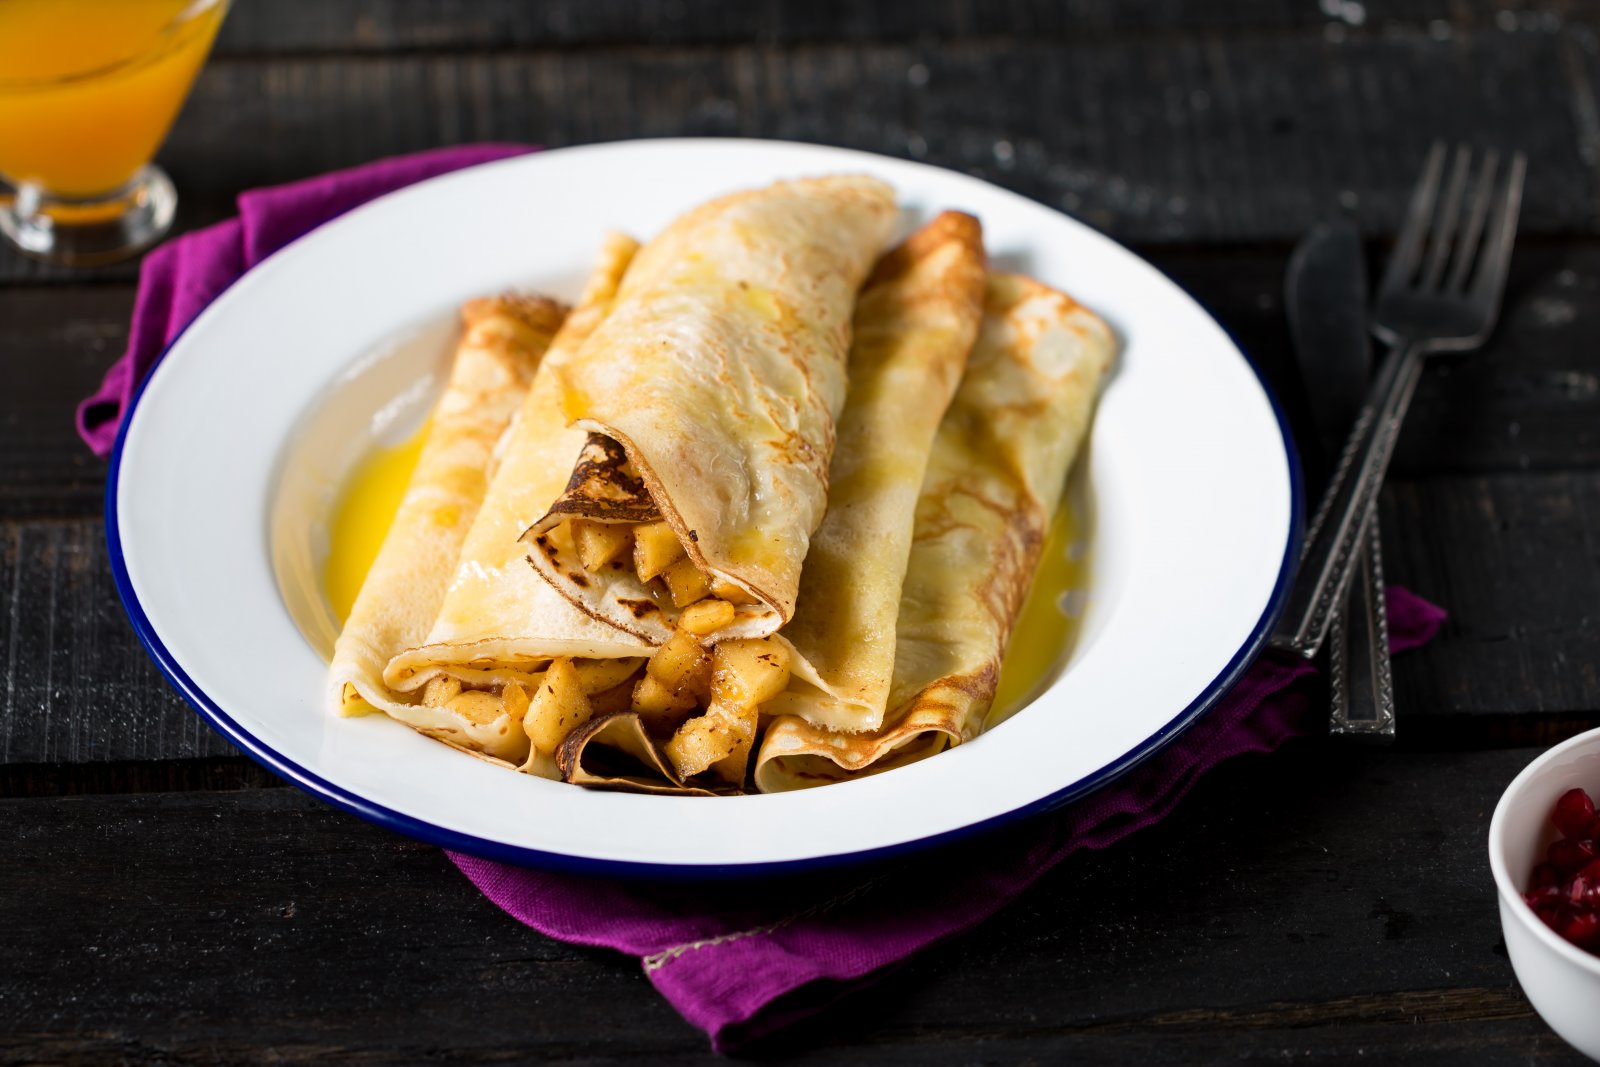 Crepes Filled With Apples & Topped With Orange Sauce